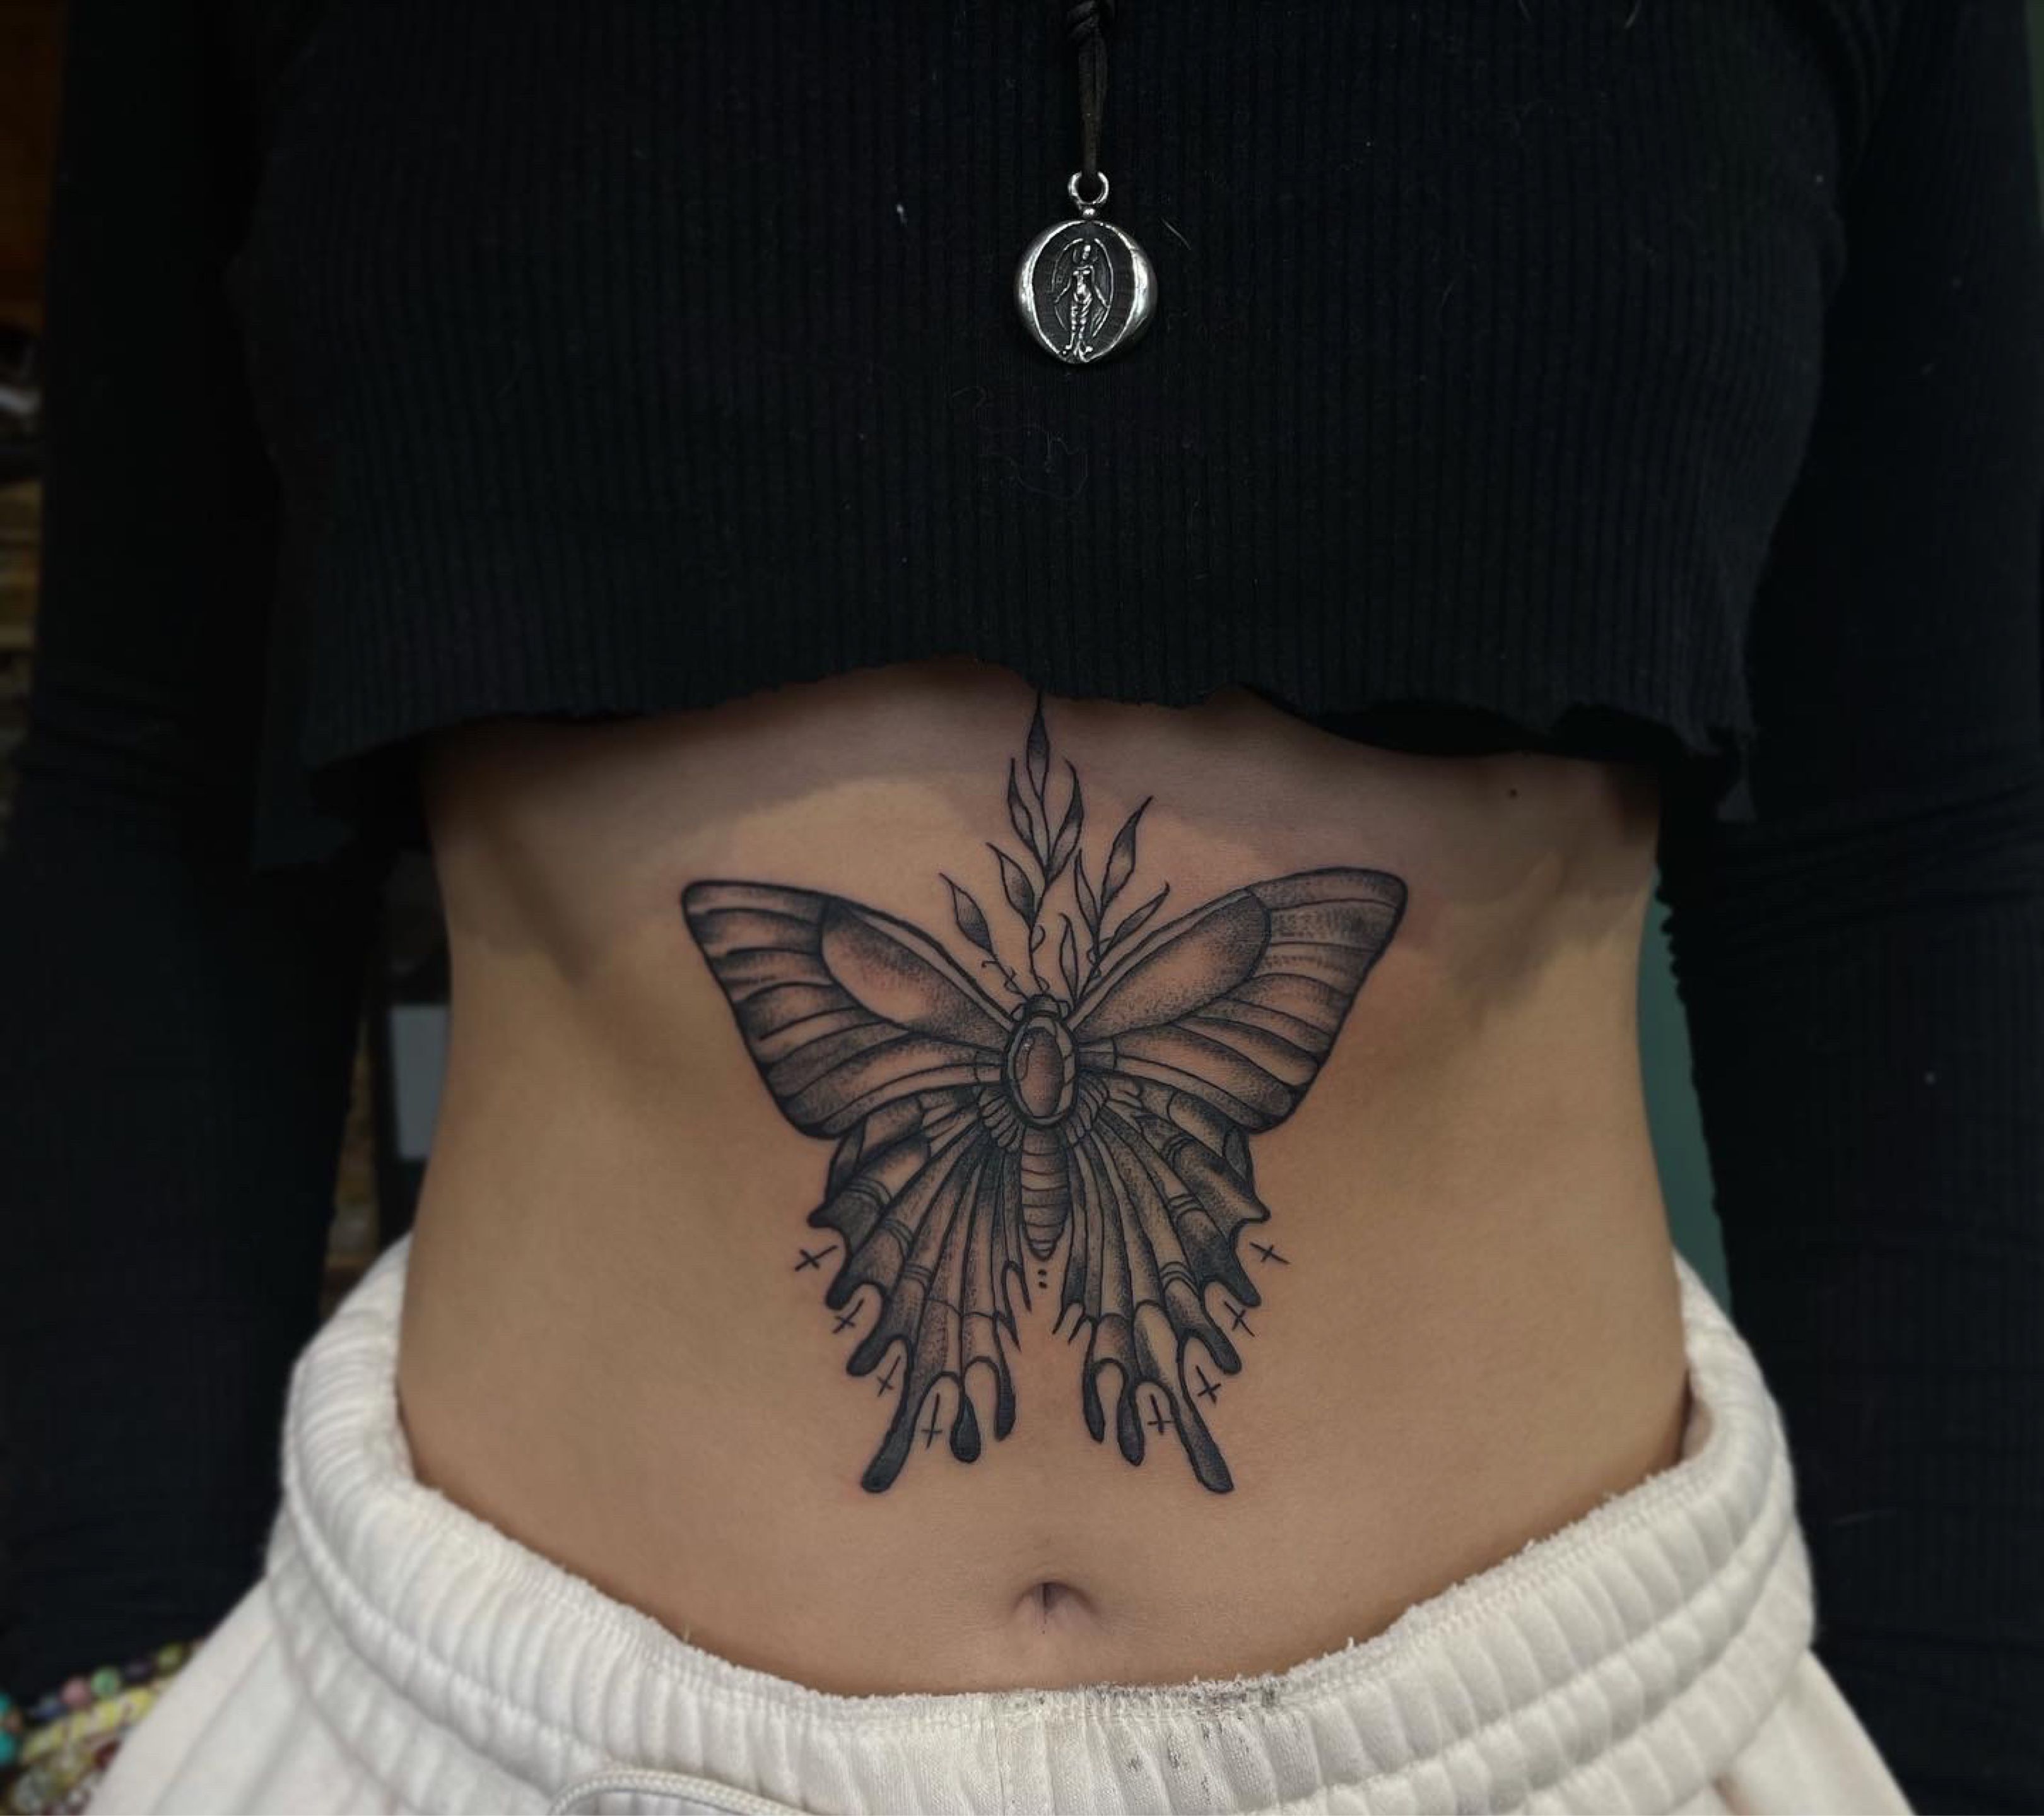 75 Gorgeous Stomach Tattoos  Designs  Meanings 2019